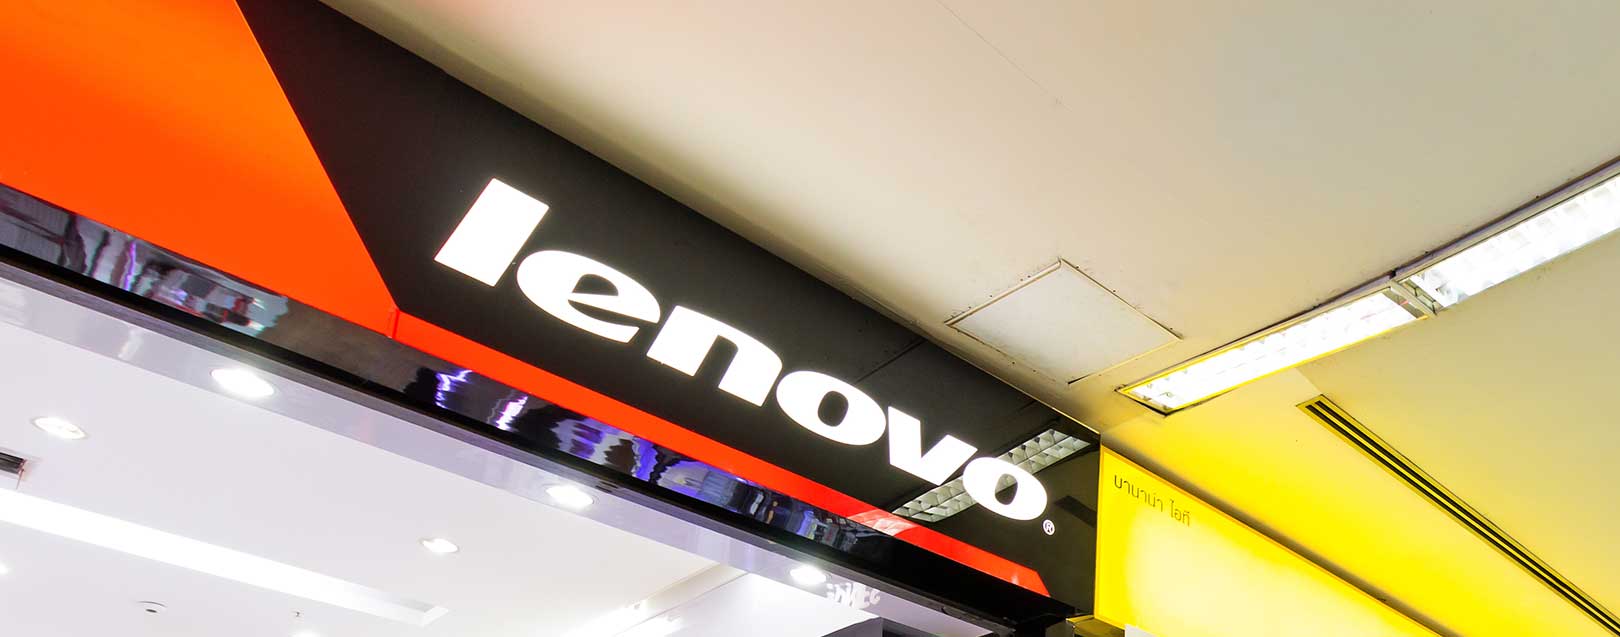 Lenovo eyes India to boost global sales growth